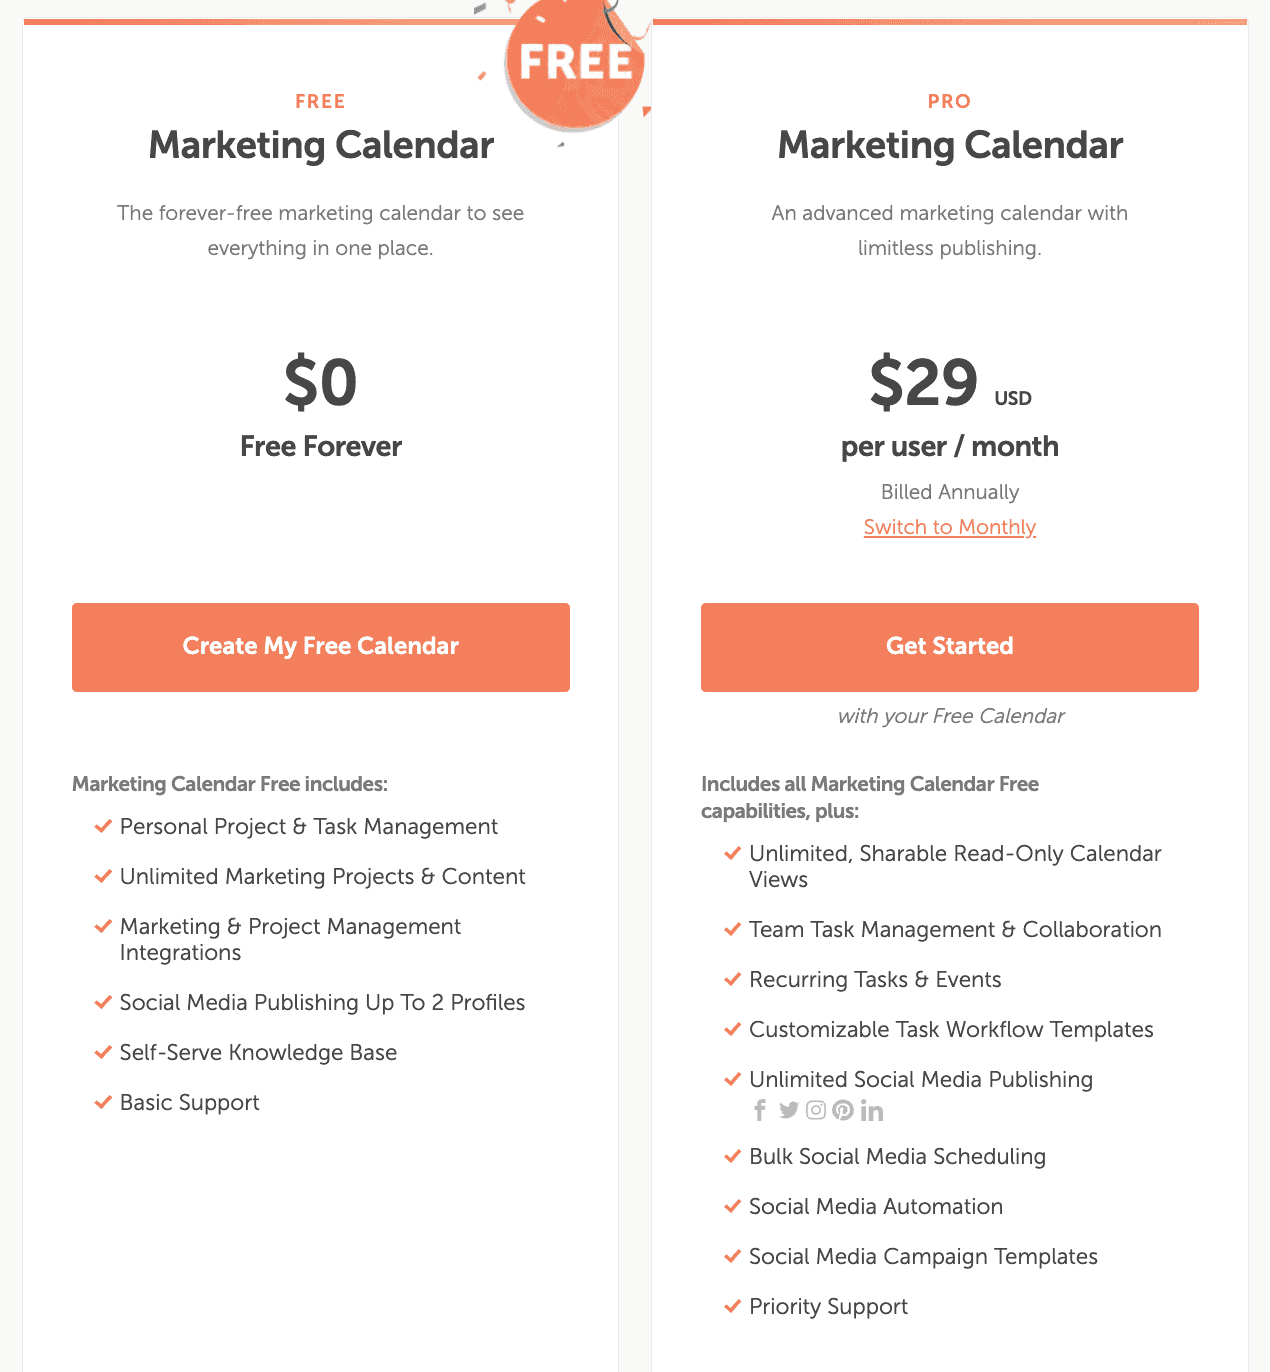 Marketing Calendar Plans and Pricing